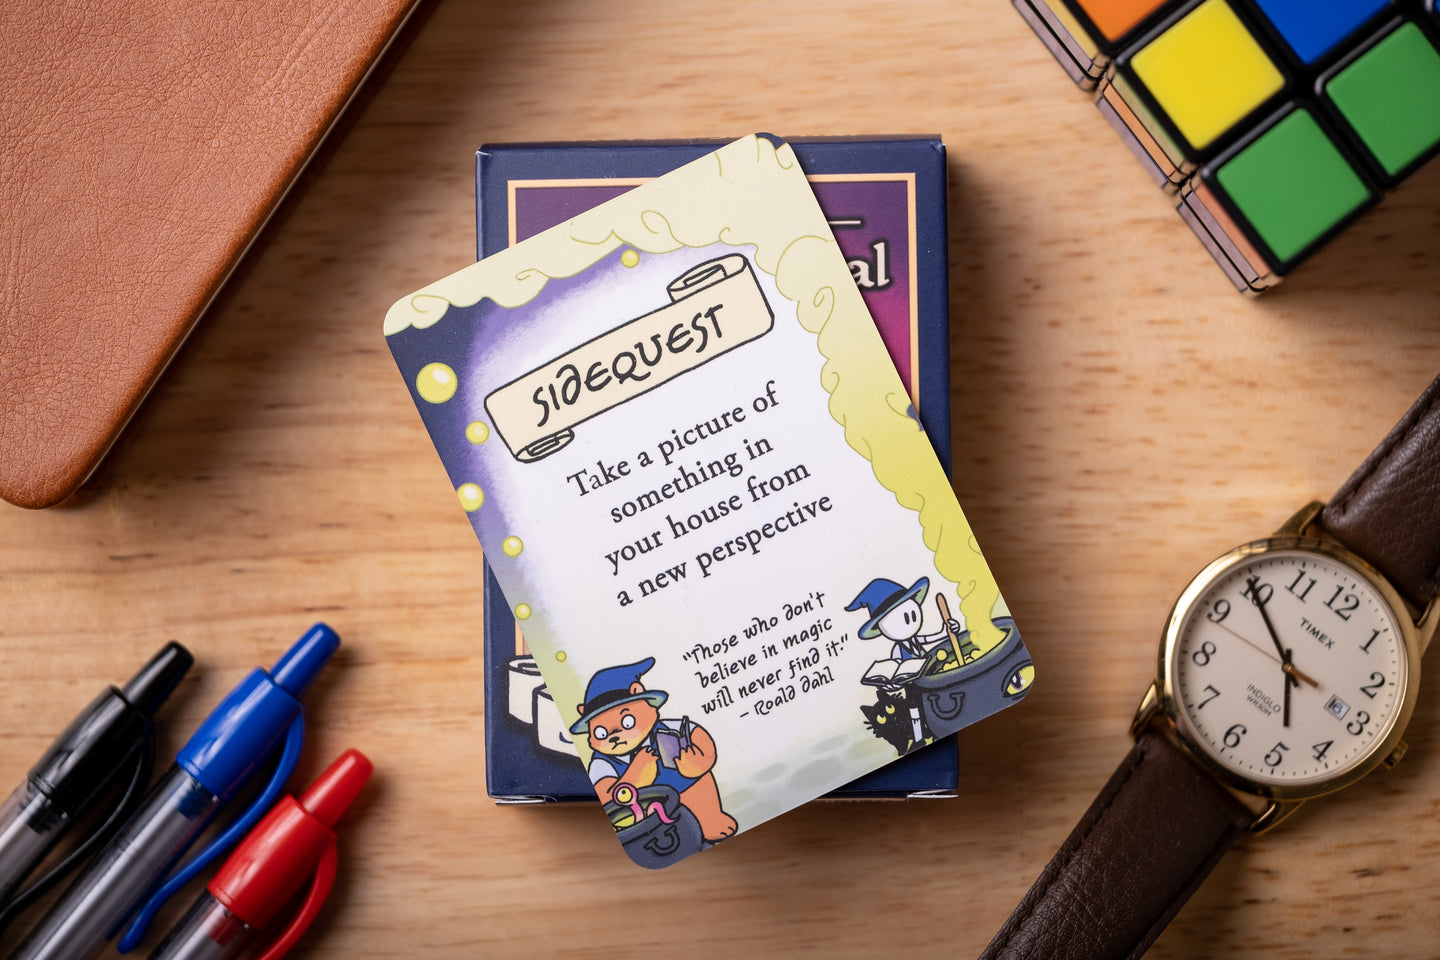 A card with a task prompt on a wooden surface surrounded by pens, a wallet, a Rubik's cube, and a watch.